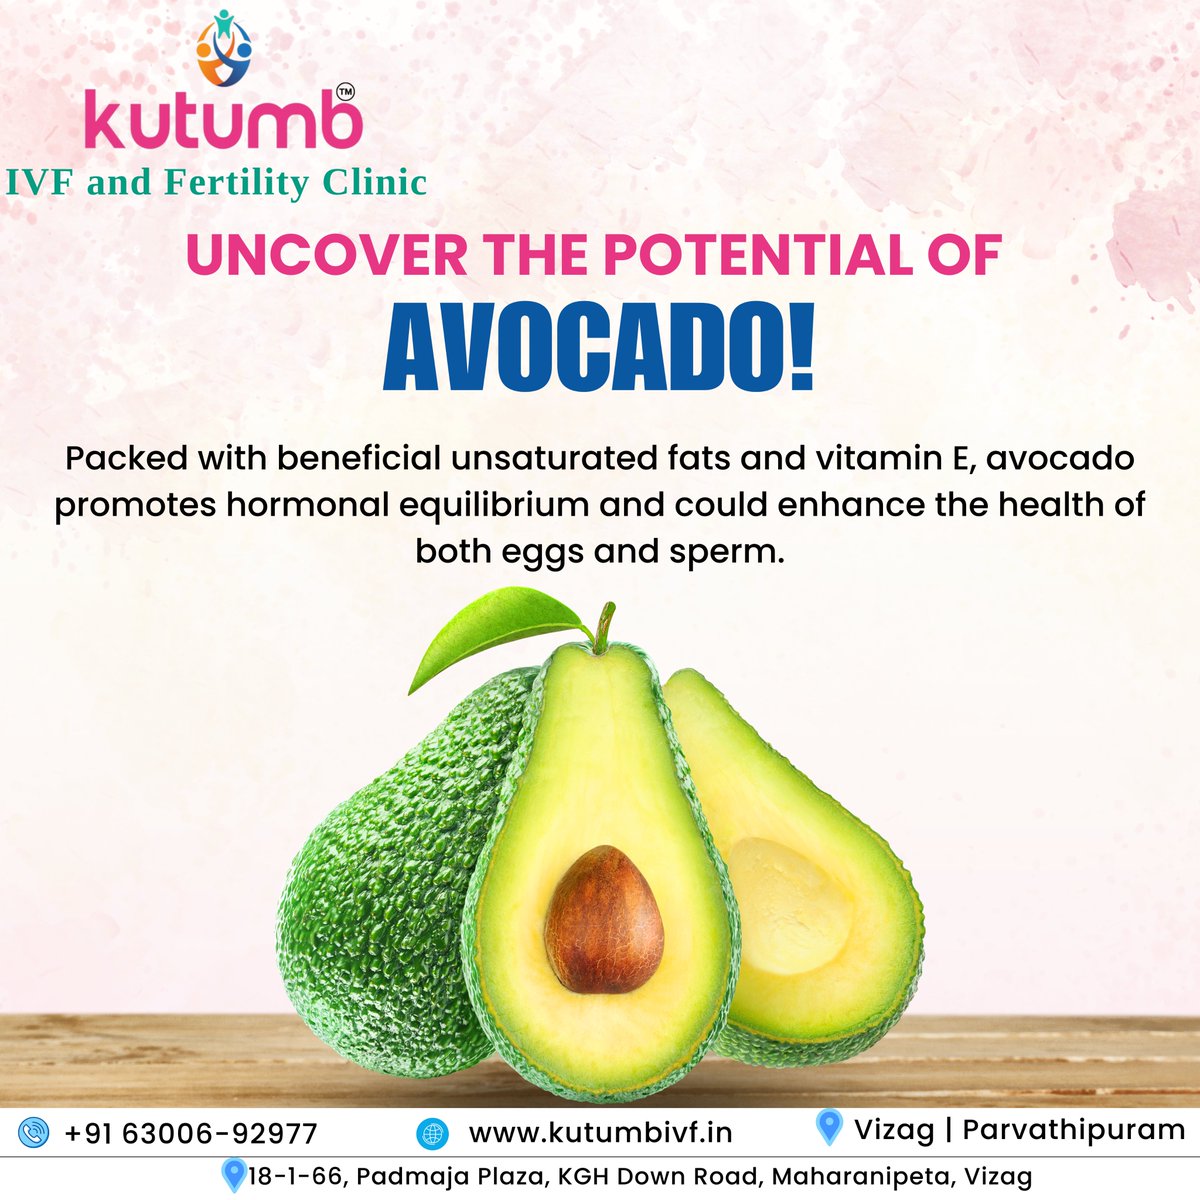 Incorporate avocado into your diet and take a step towards enhancing your reproductive health. Book your appointment today to explore more fertility-boosting tips.
Call us at +91 63006-92977
#FertilityTips #healthyeating #healthyeatingtips #healthyweight #InfertilitySolutions